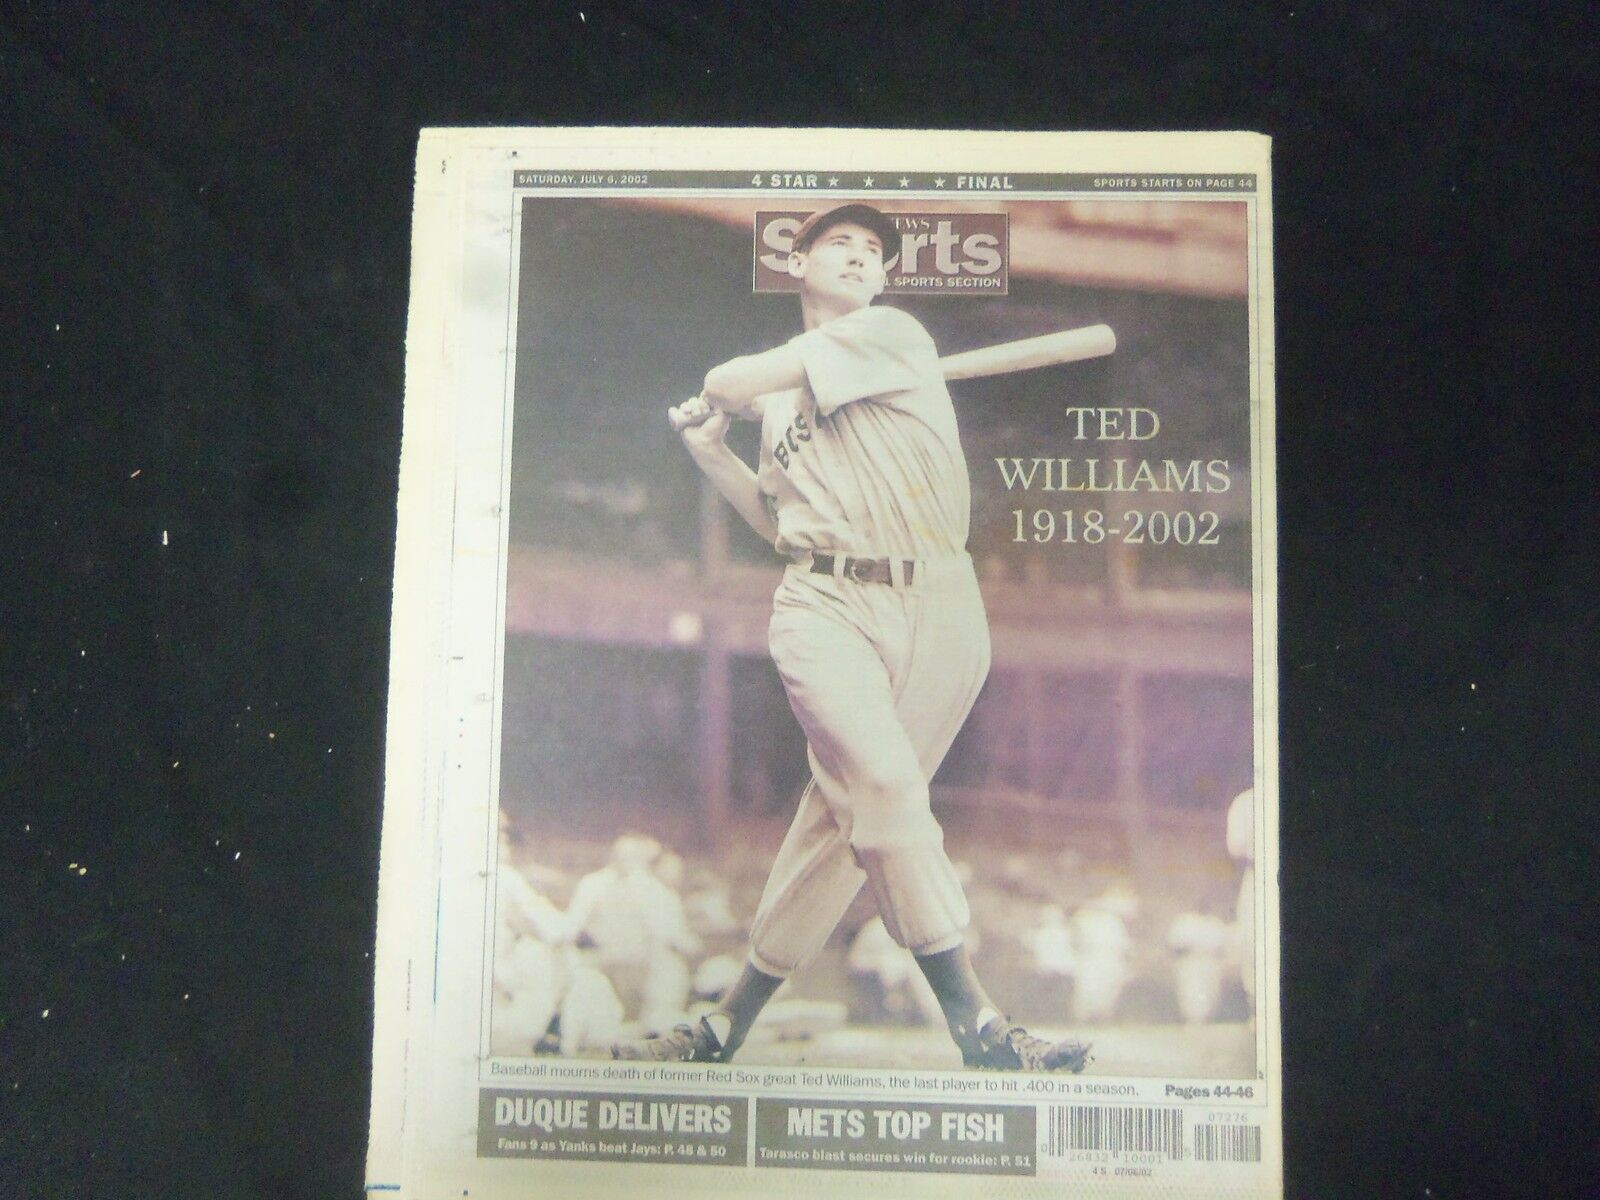 2002 JULY 6 NEW YORK DAILY NEWS - TED WILLIAMS RED SOX GREAT DIED - NP 2156